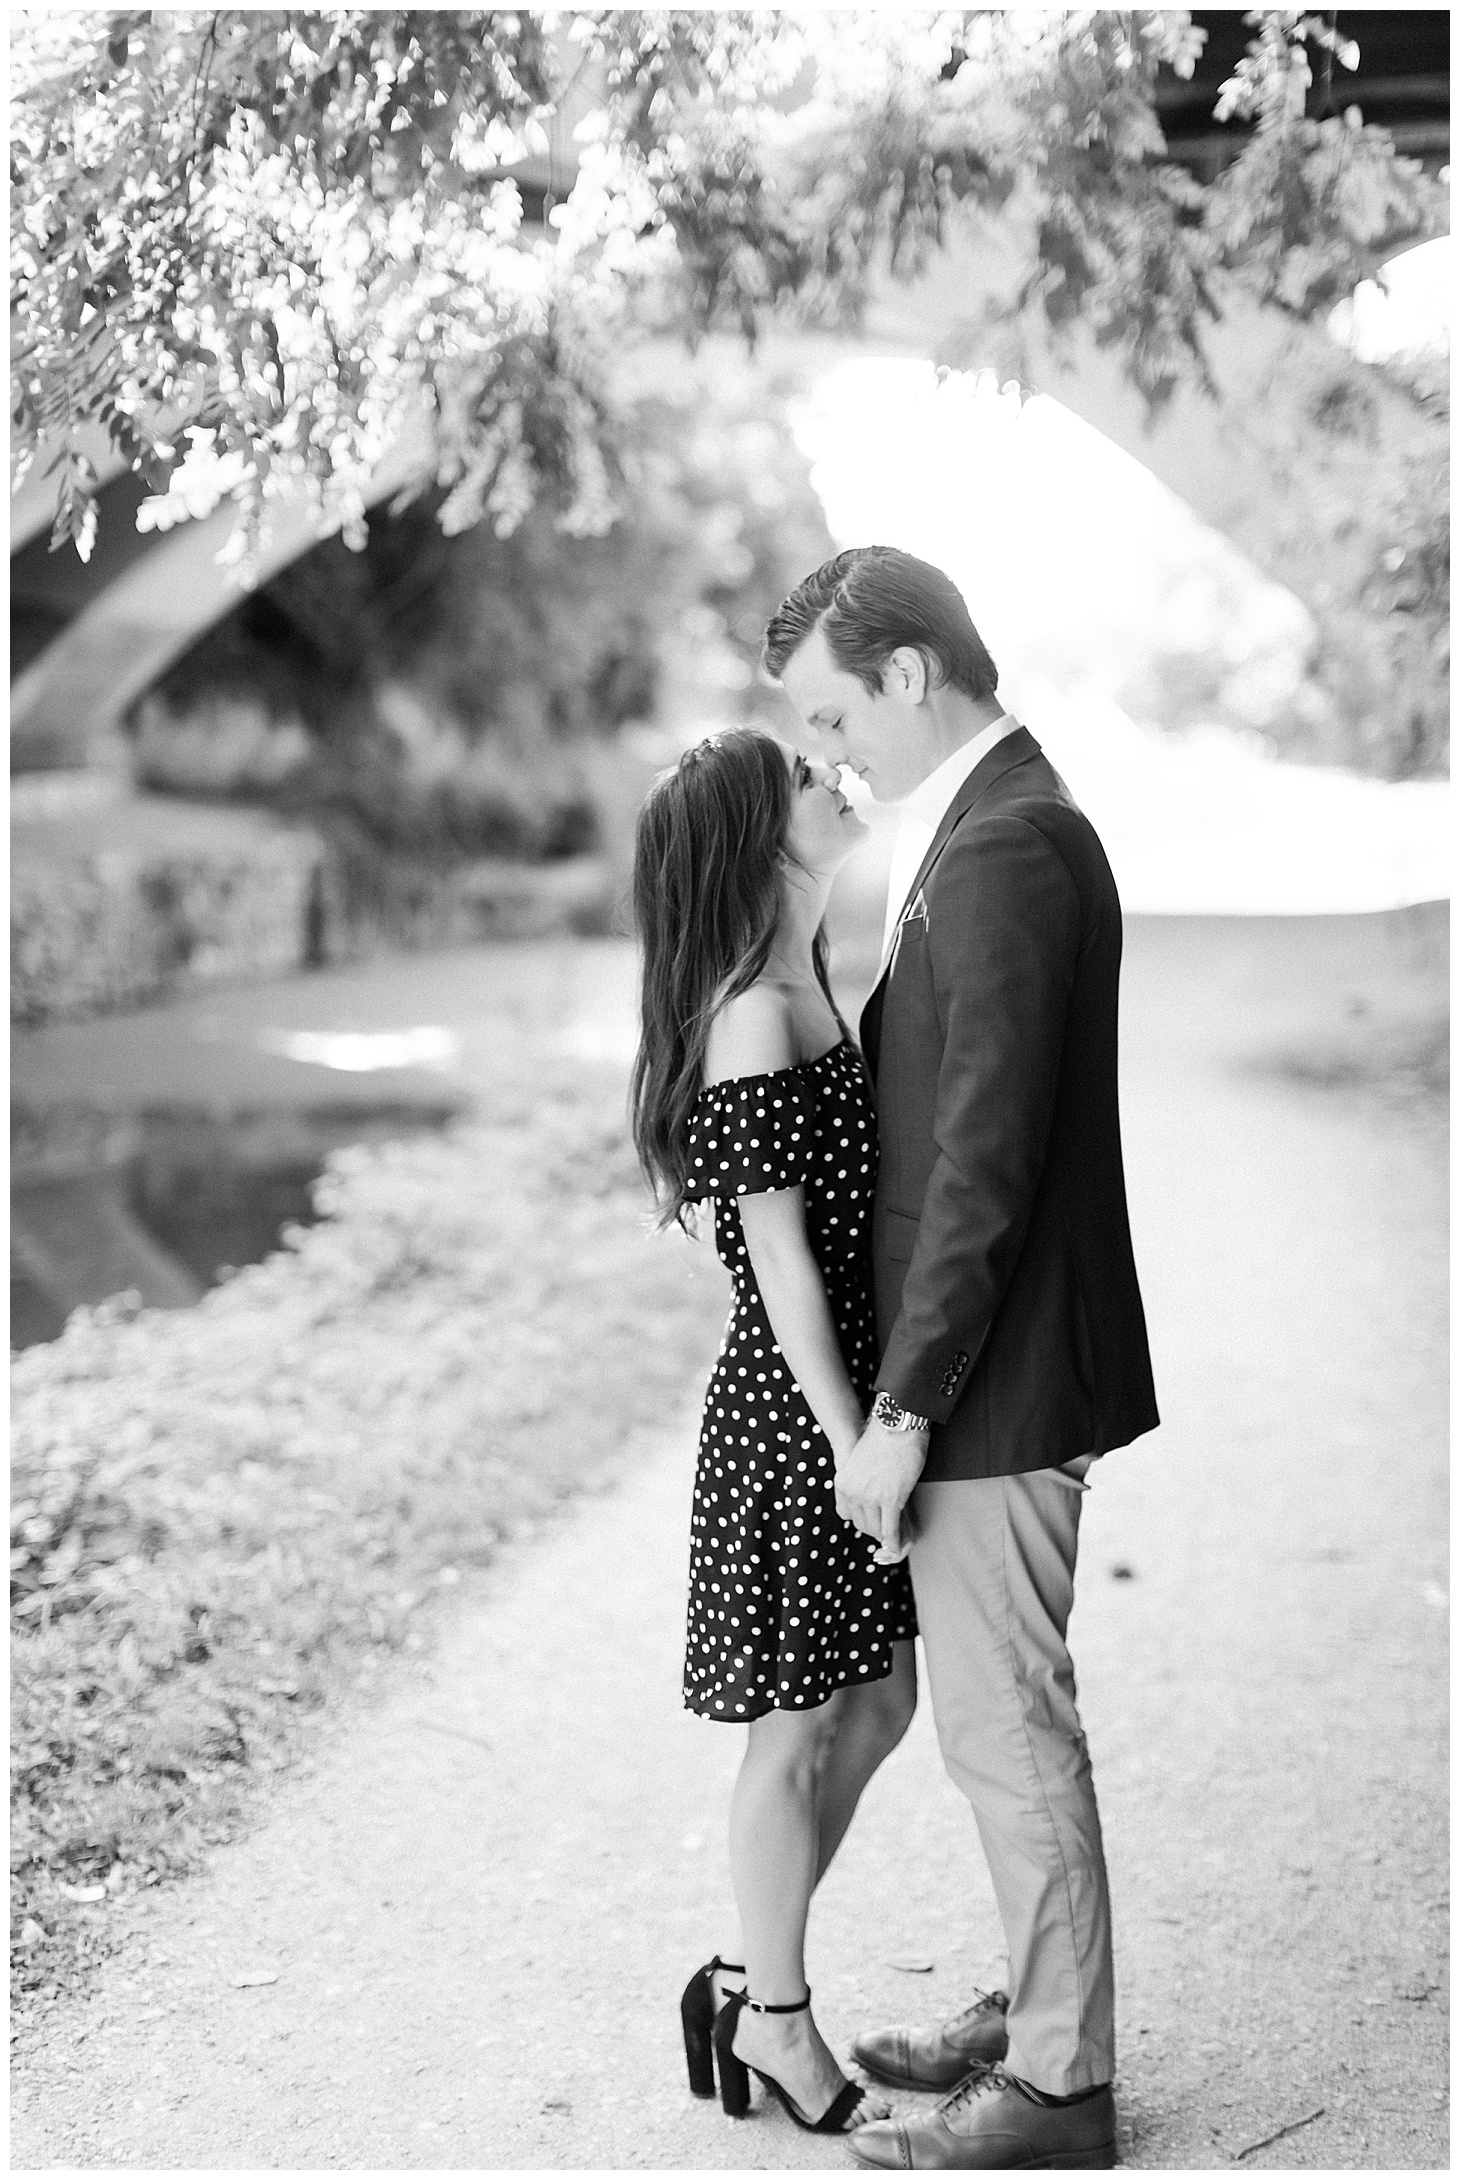 Sarah Bradshaw Photography, Preppy Morning Engagement Session with Golden Light, Engagement Portraits in DC